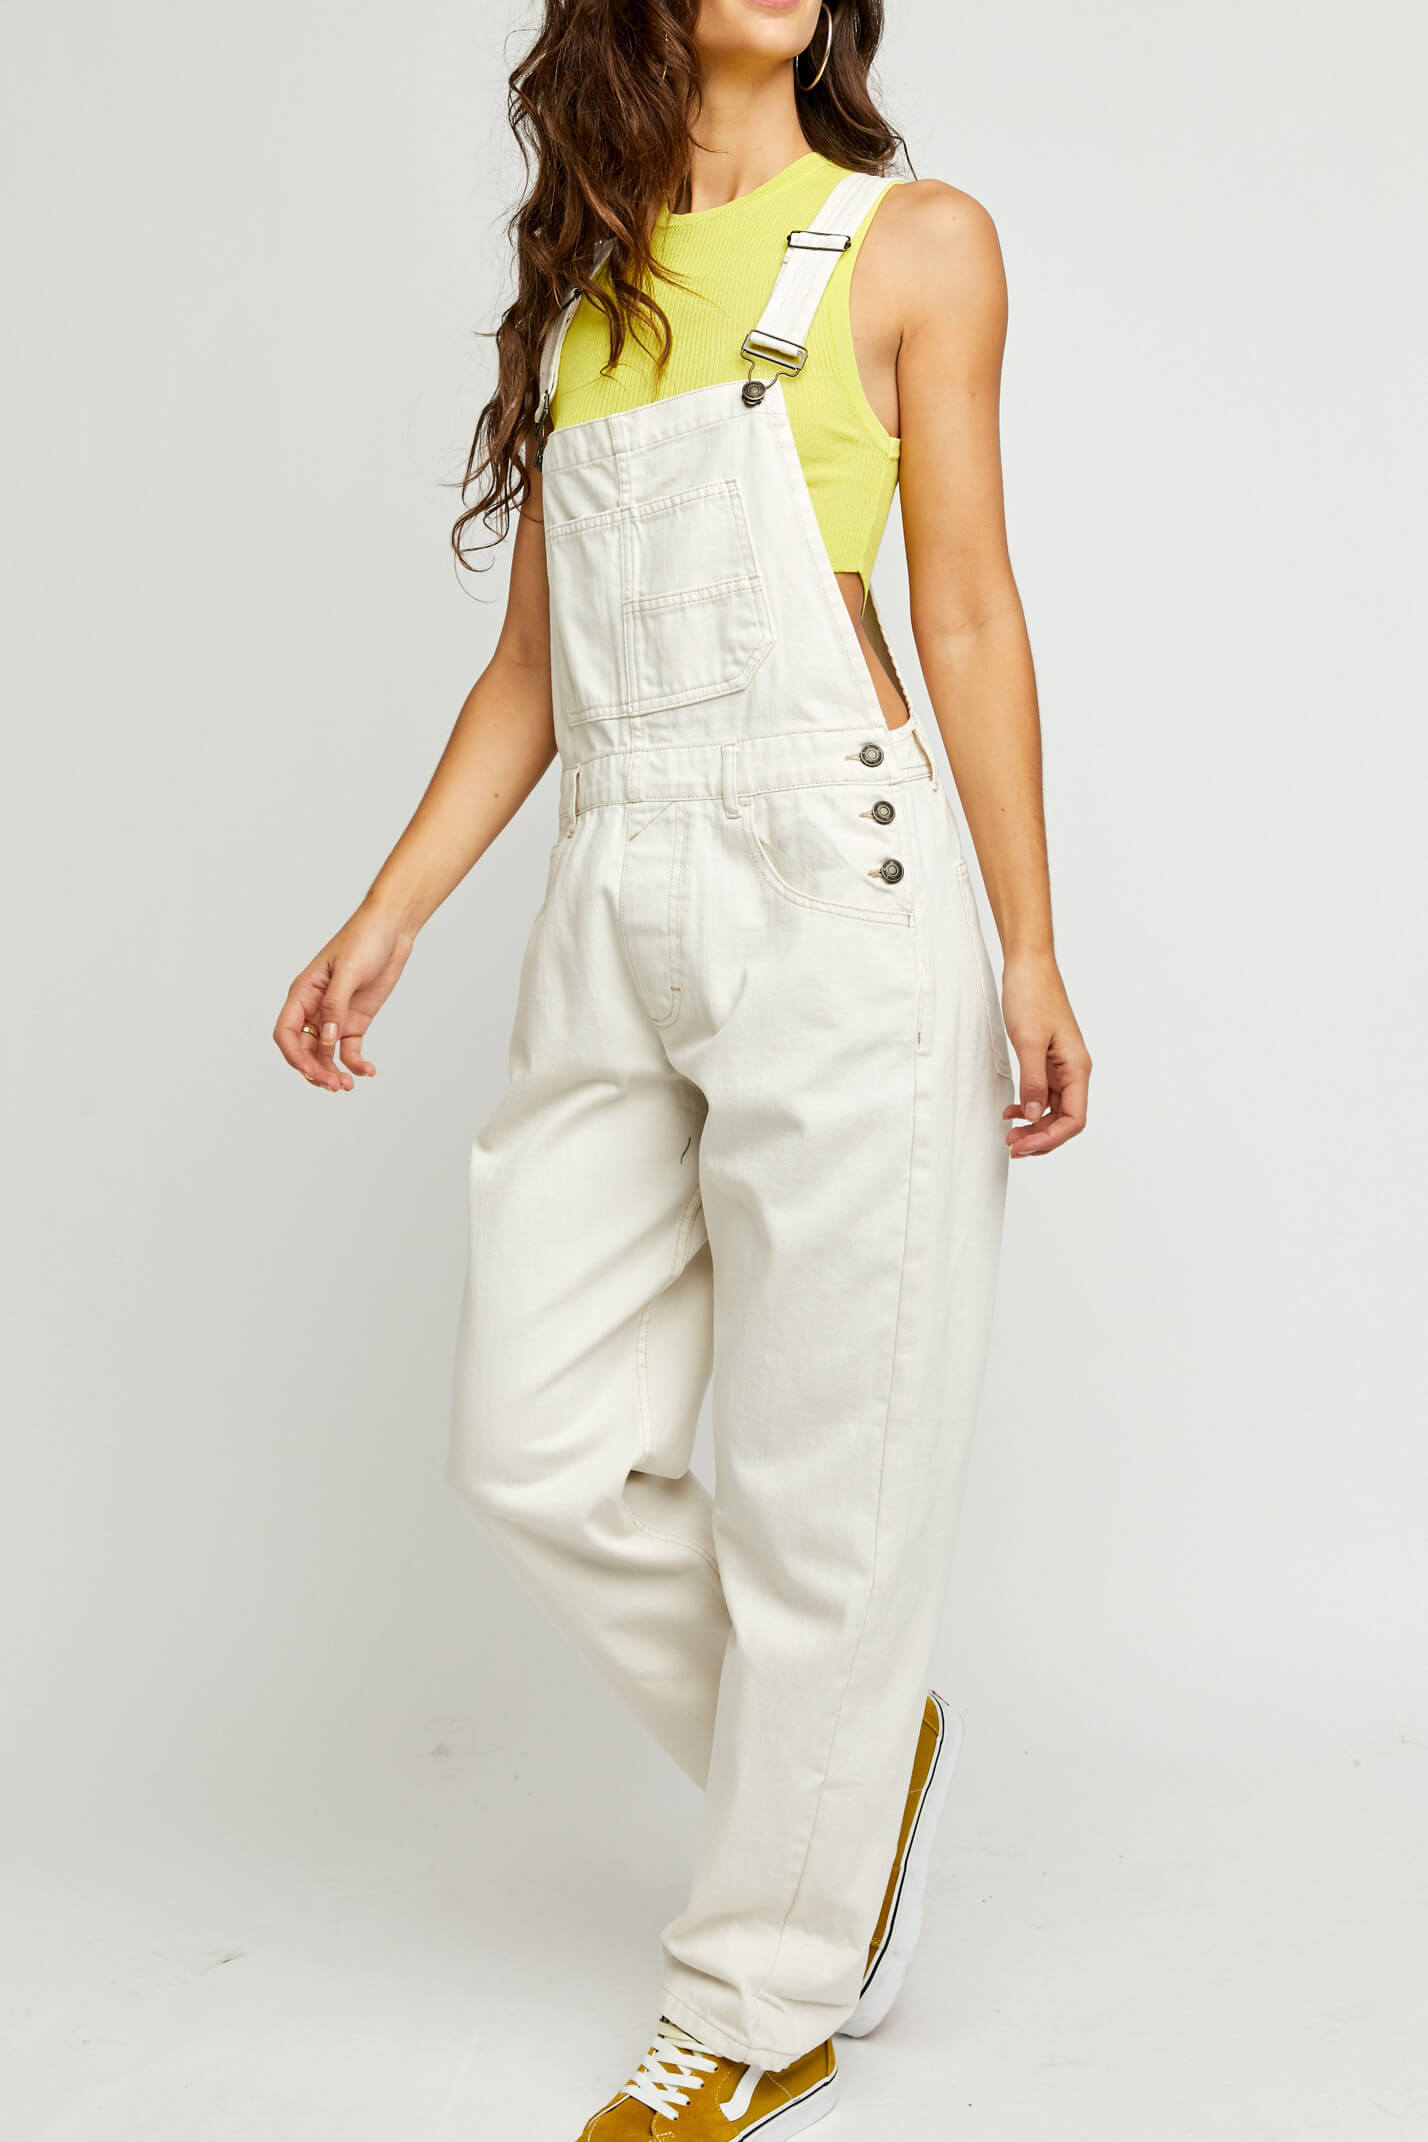 Free People ziggy denim overall in parchment